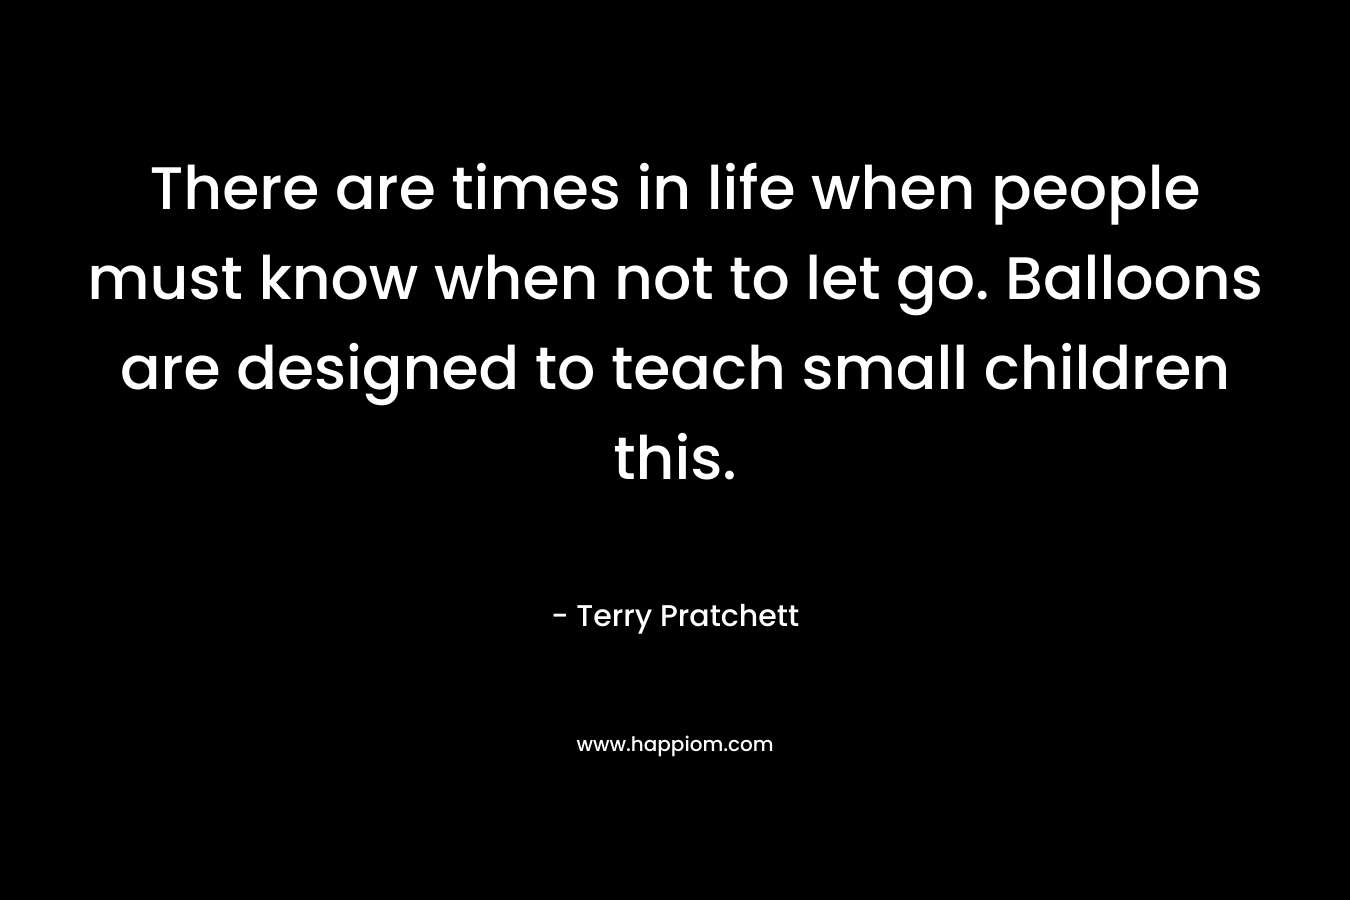 There are times in life when people must know when not to let go. Balloons are designed to teach small children this. – Terry Pratchett